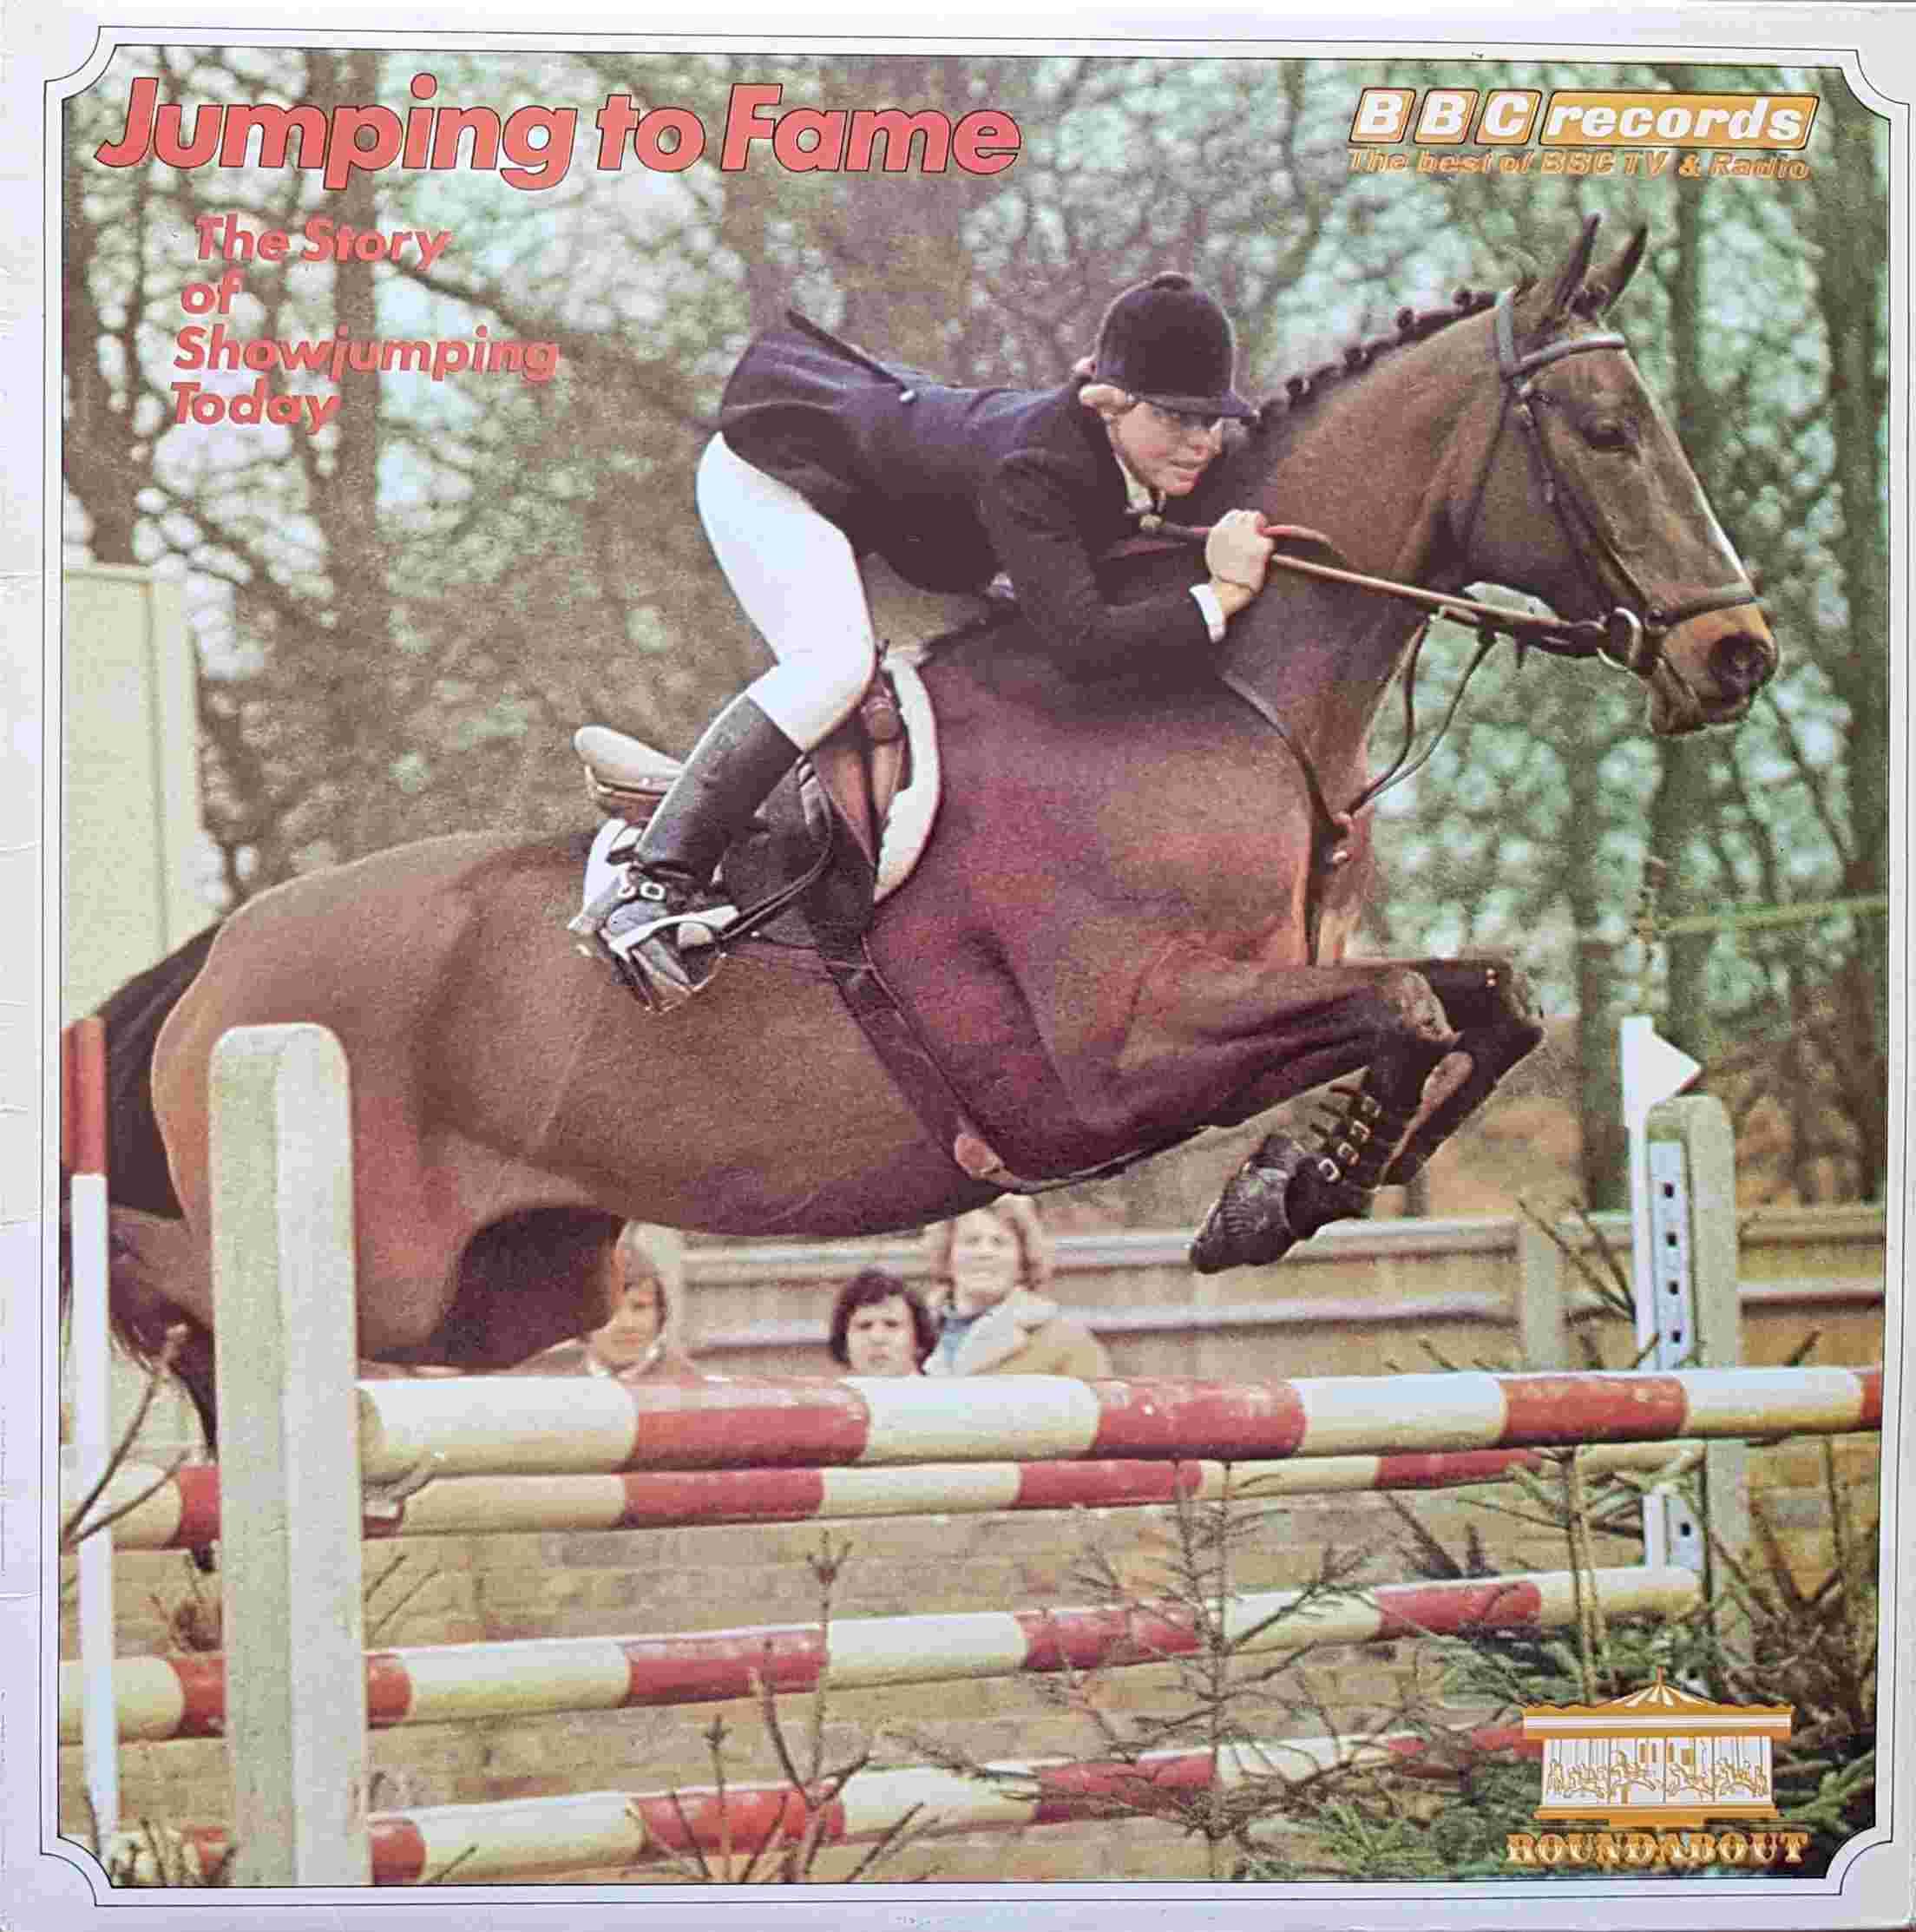 Picture of RBT 106 Jumping to fame by artist Jeanine McMullen from the BBC albums - Records and Tapes library